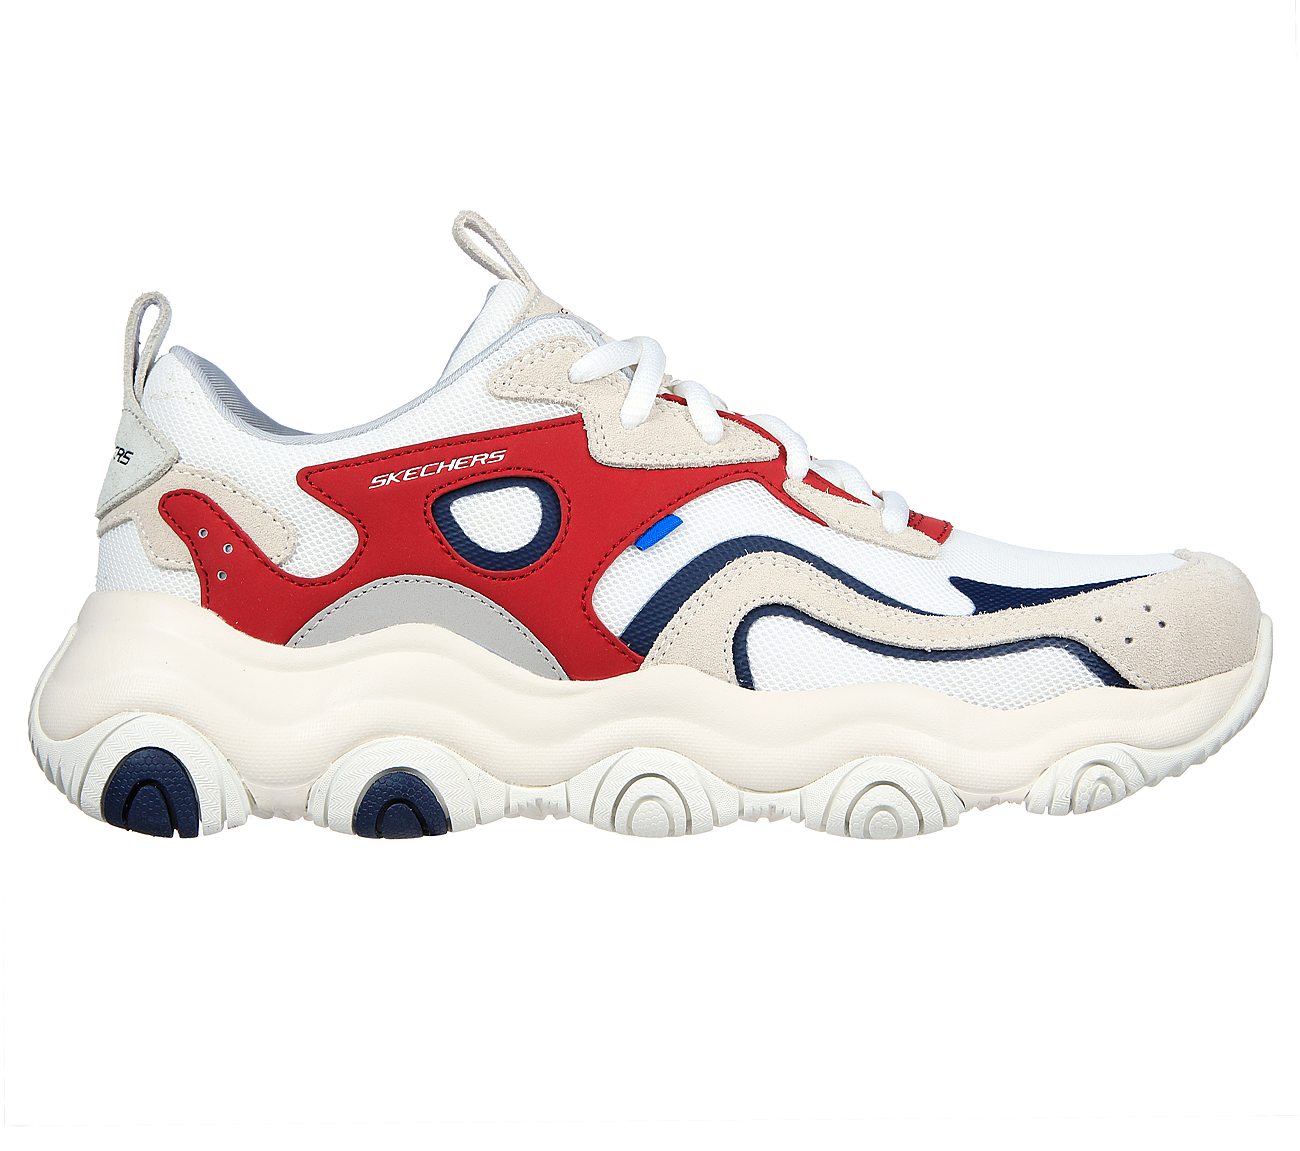 ROVER X-PROXIMITY, WHITE/NAVY/RED Footwear Right View